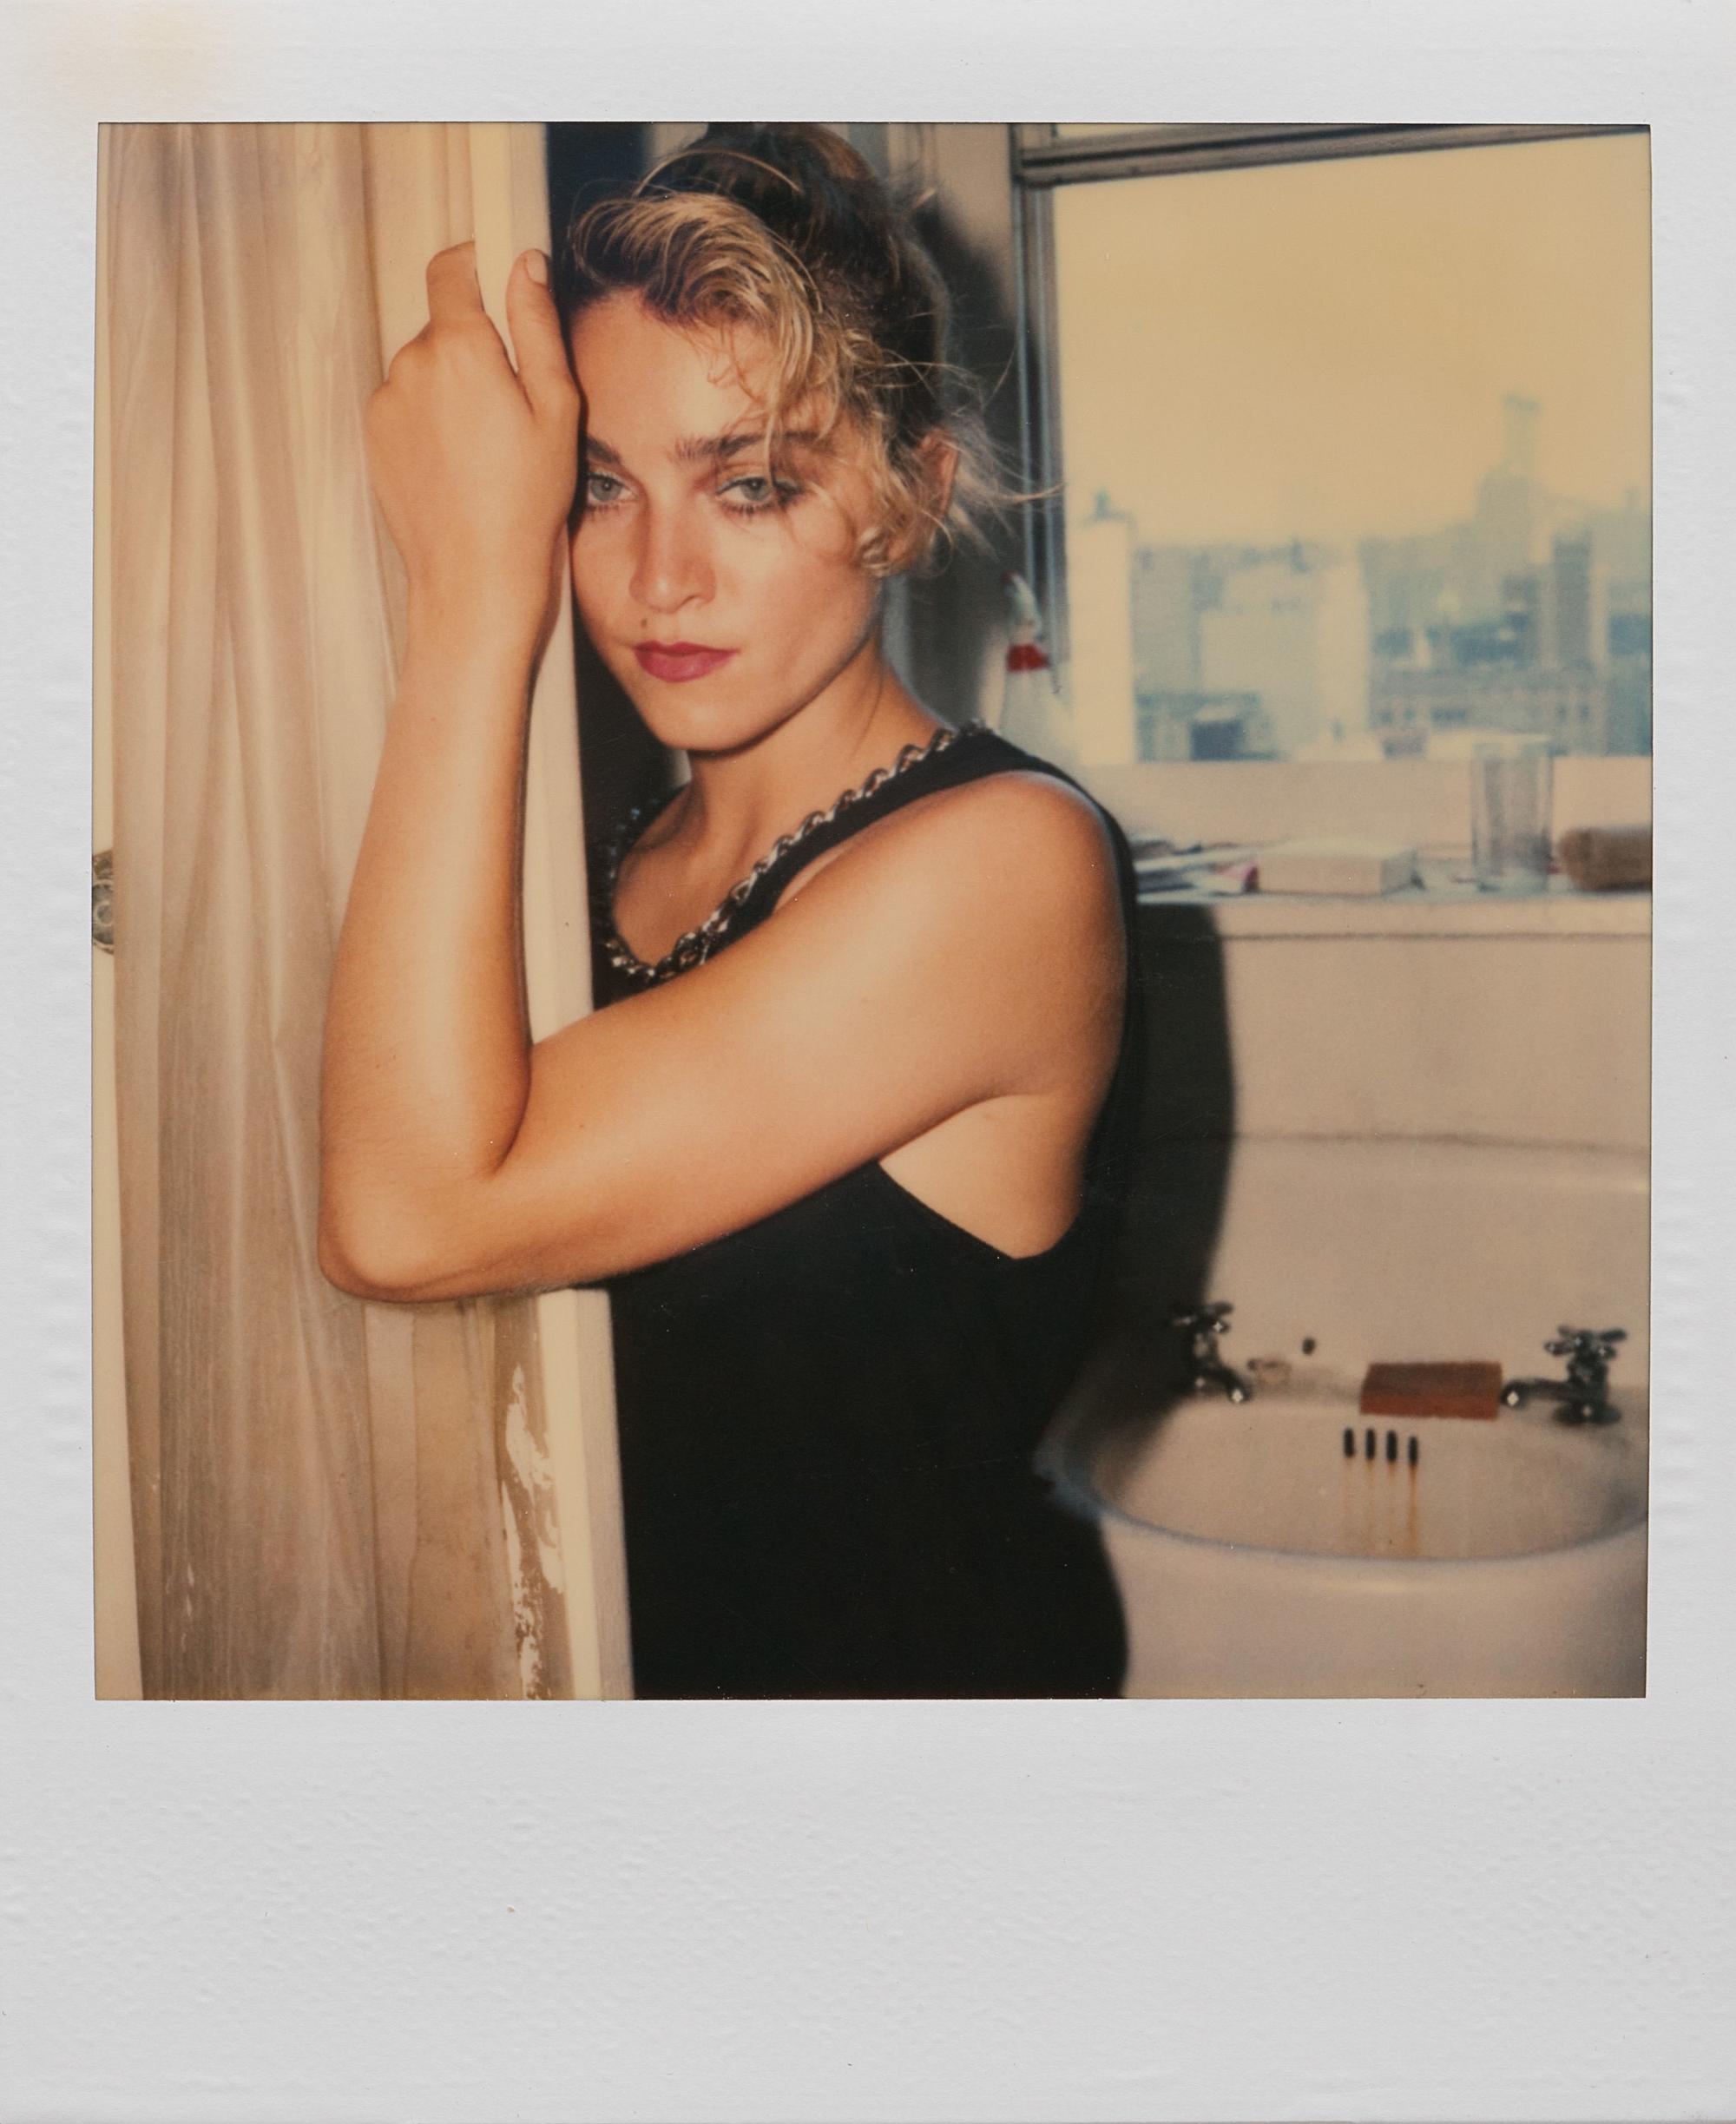 66-long-lost-casting-polaroids-of-madonna-show-a-mega-star-on-the-verge-body-image-1471356607